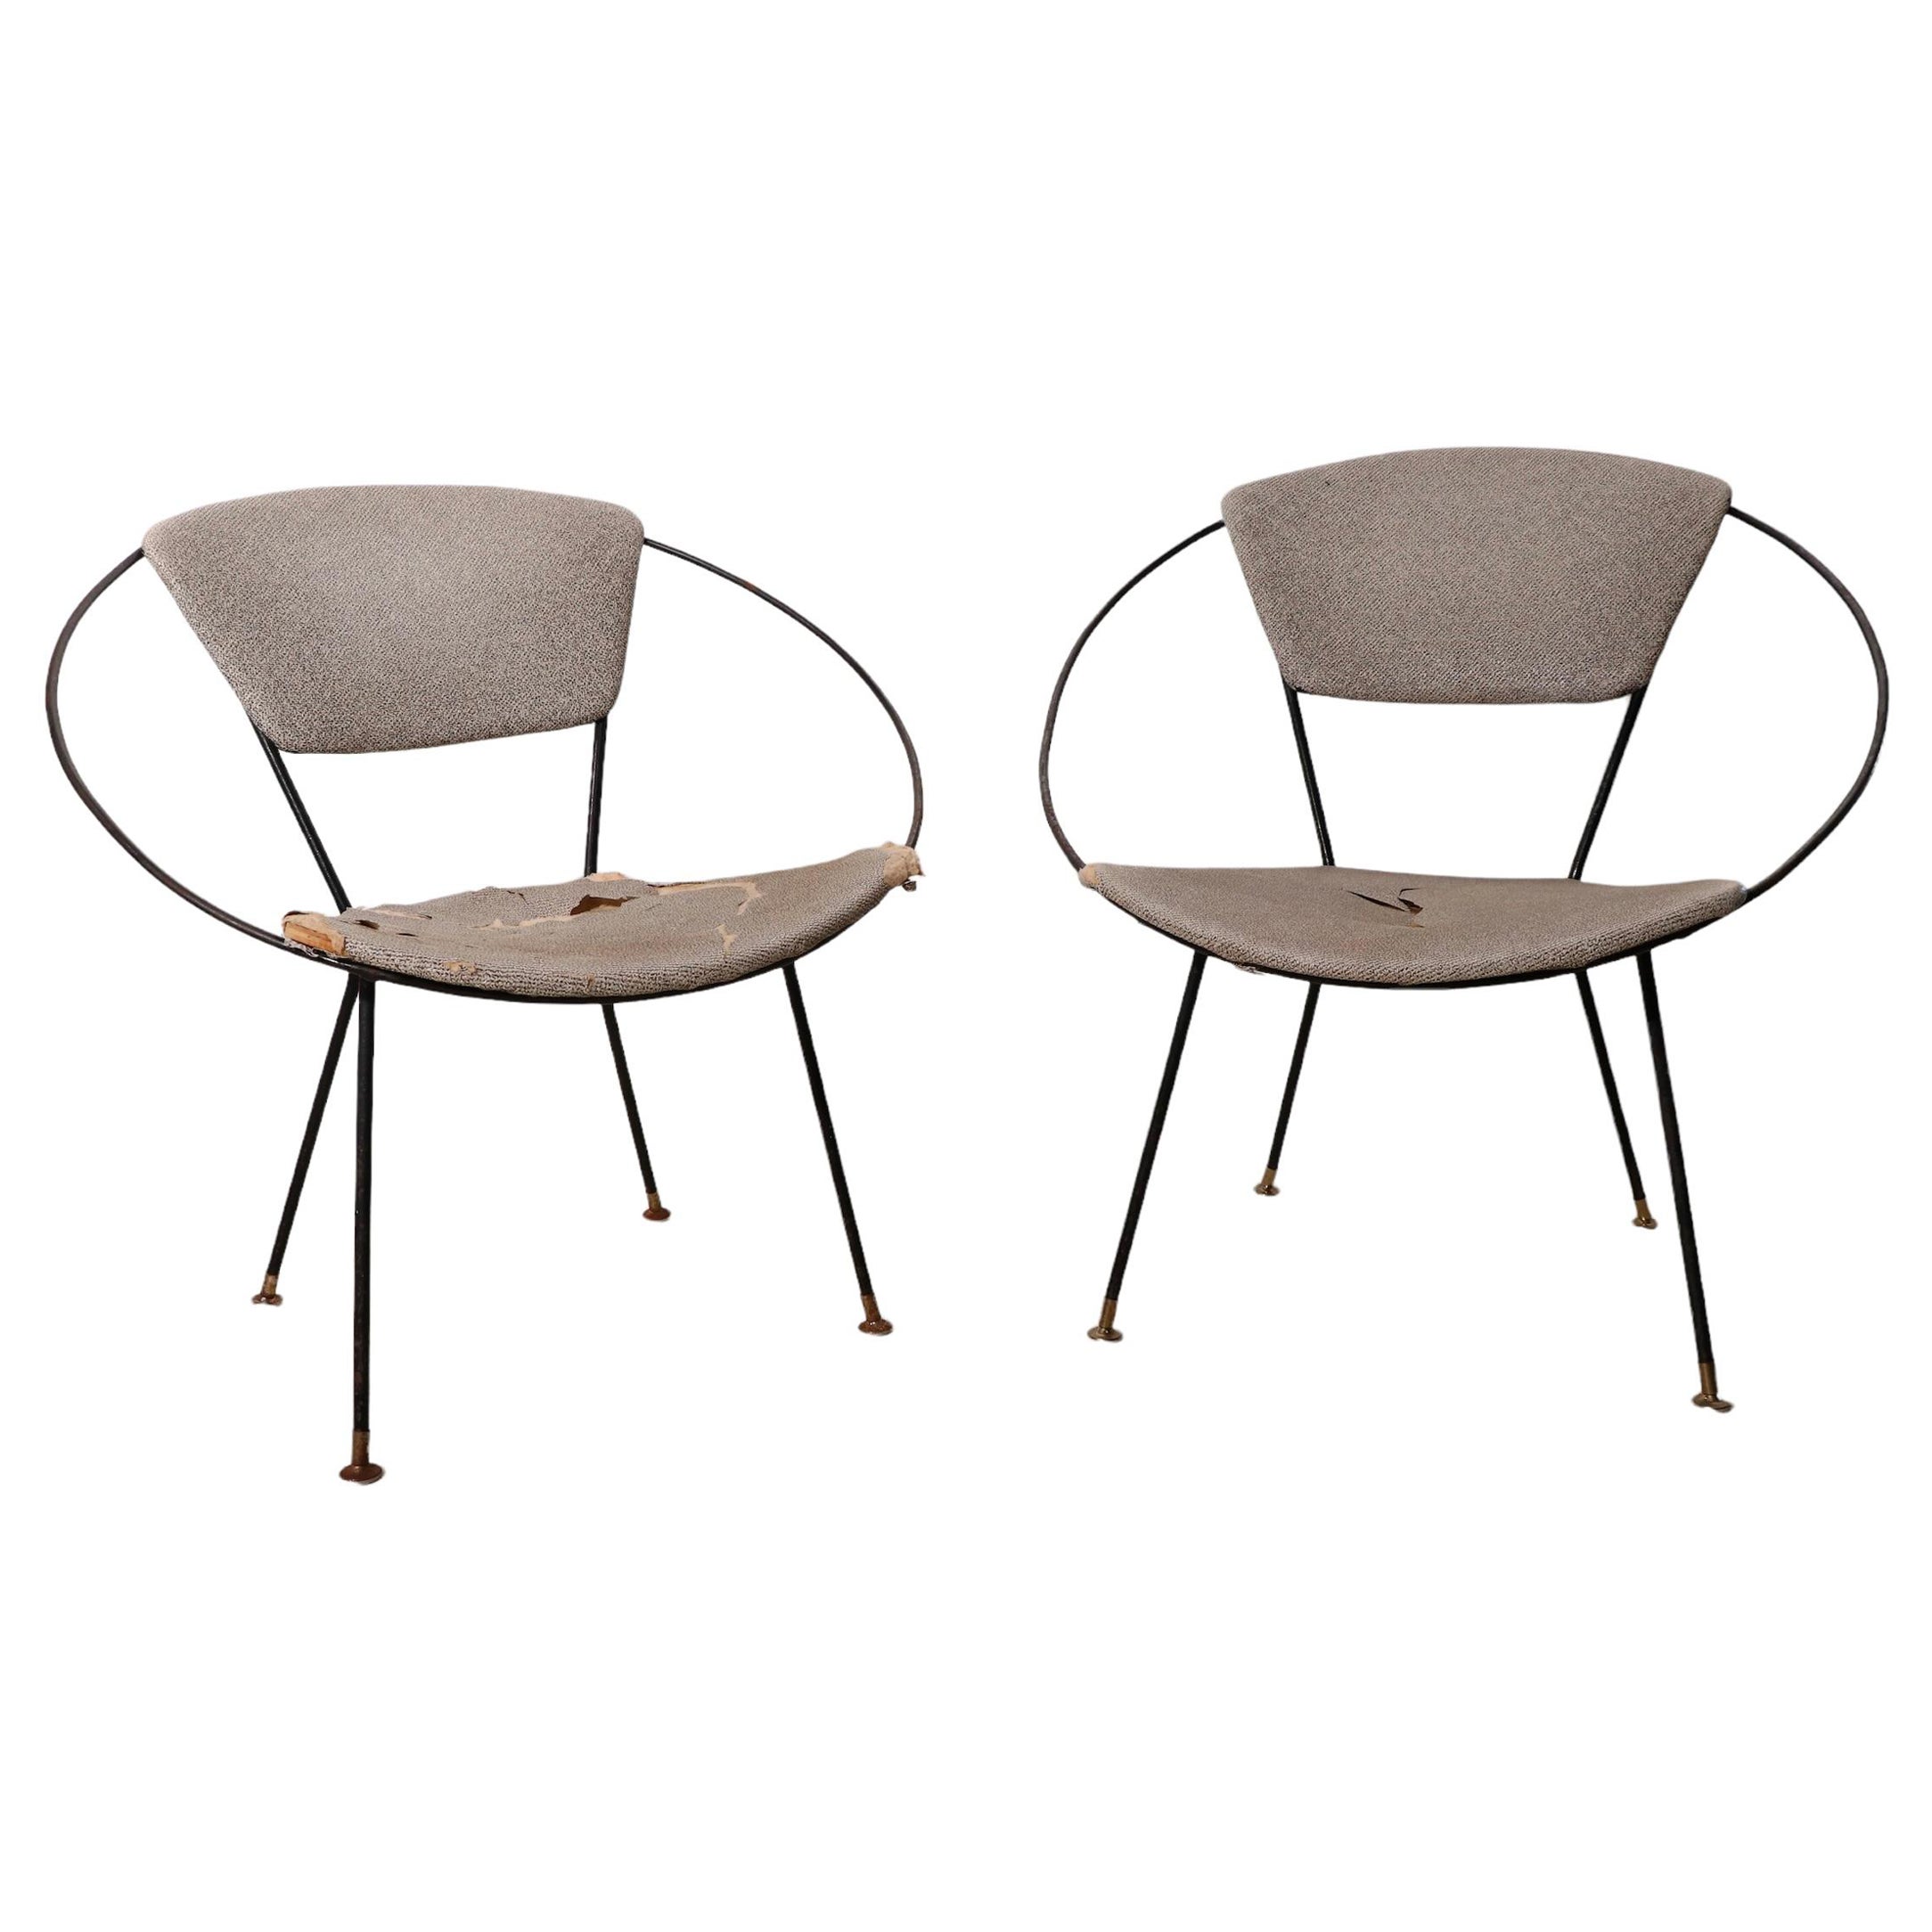 Pr. Wrought Iron Mid Century Hoop Chairs by John Cicchelli for Riley Wolff 1950s